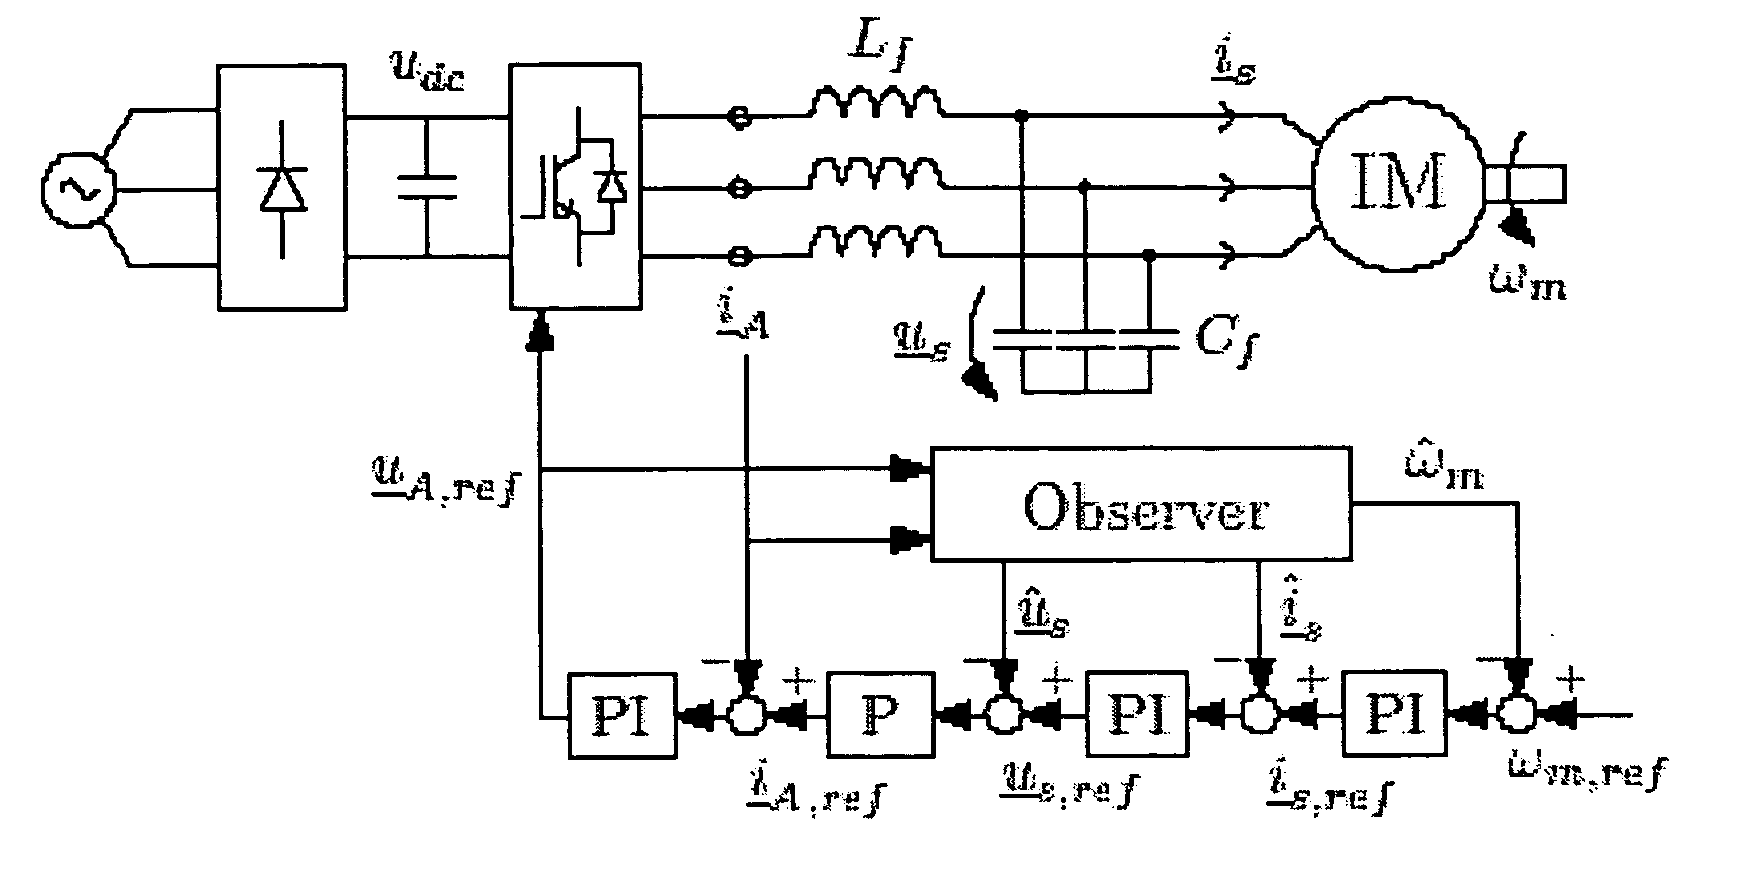 Speed sensorless control of an induction machine using a pwm inverter with output lc filter